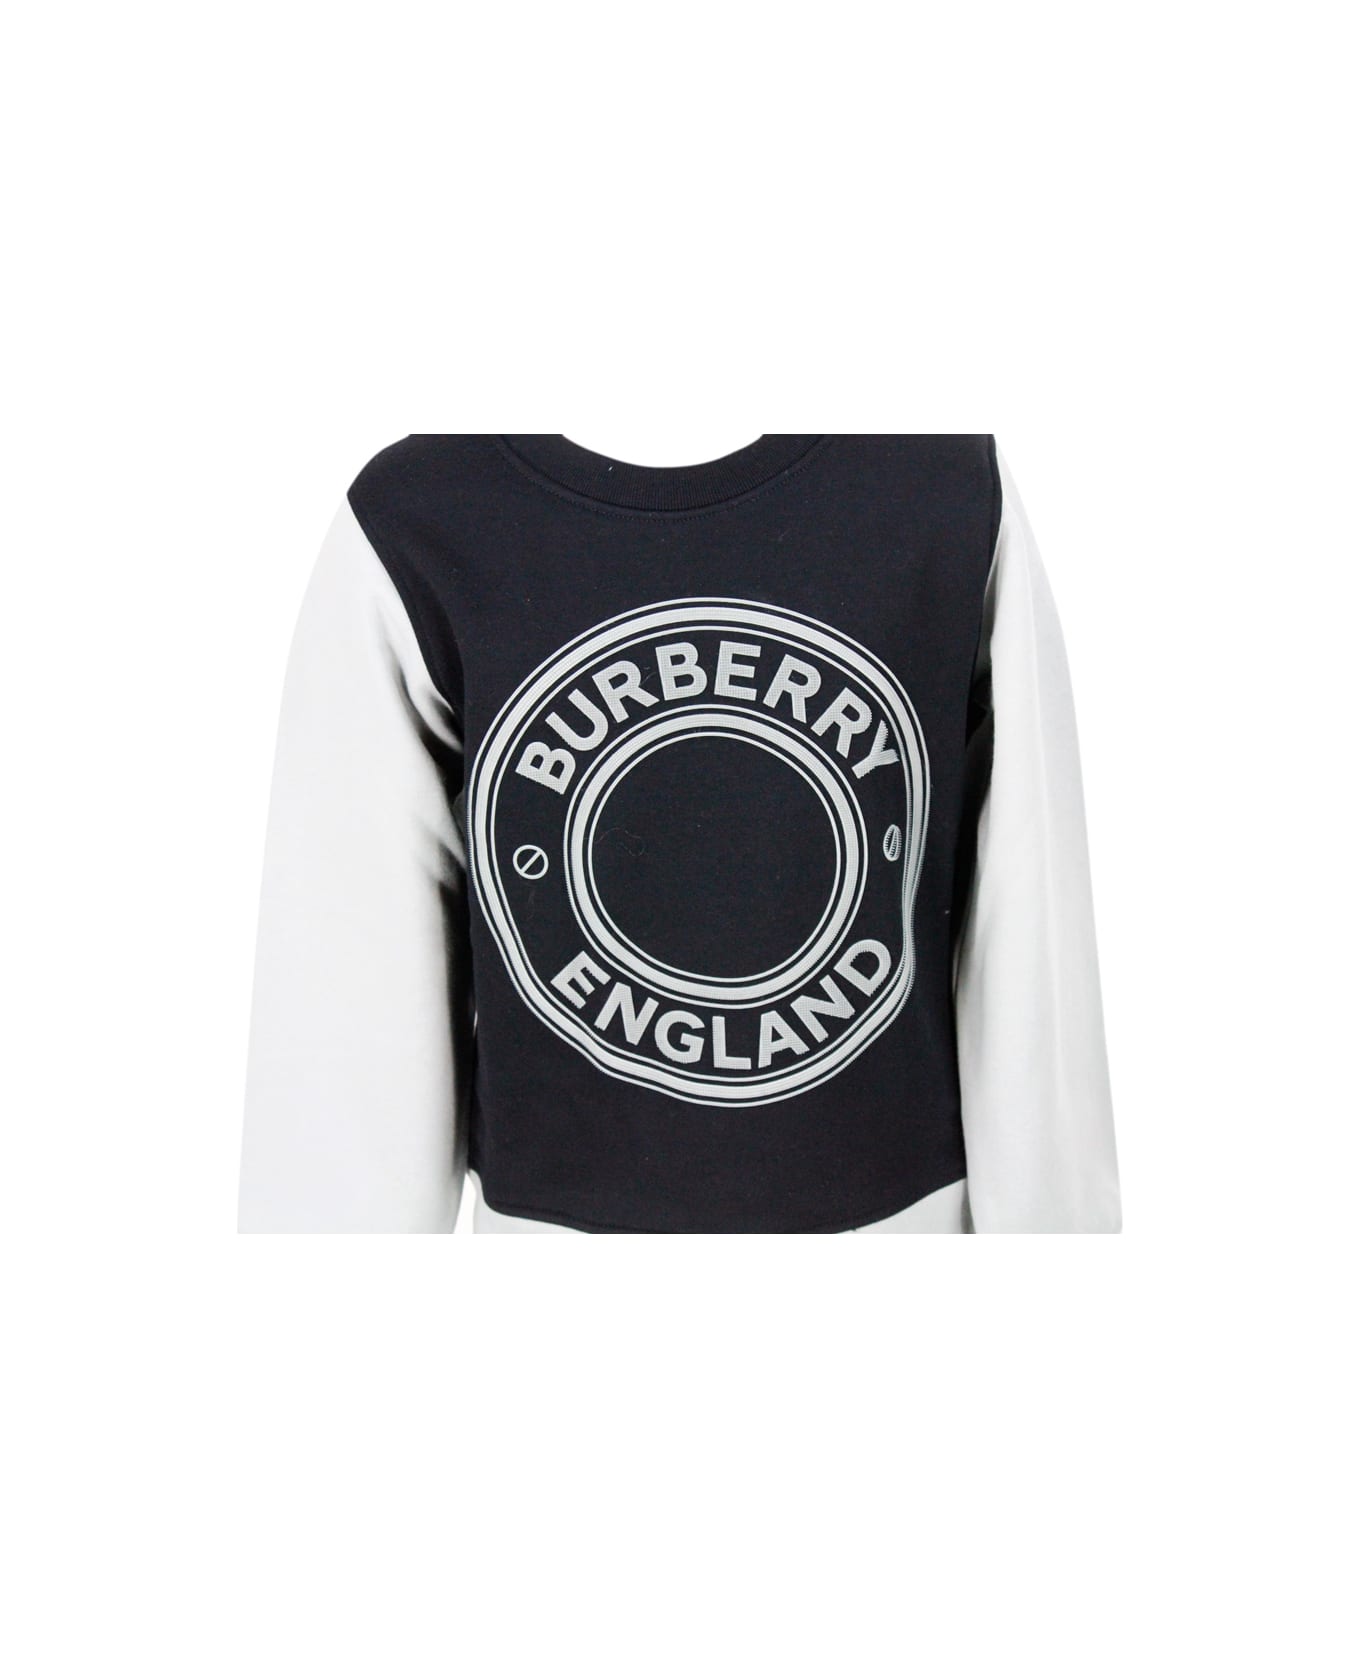 Burberry Cotton Crewneck Sweatshirt With Central Rubberized Logo In Relief With Sleeves And Bottom In Contrasting Colour - Black